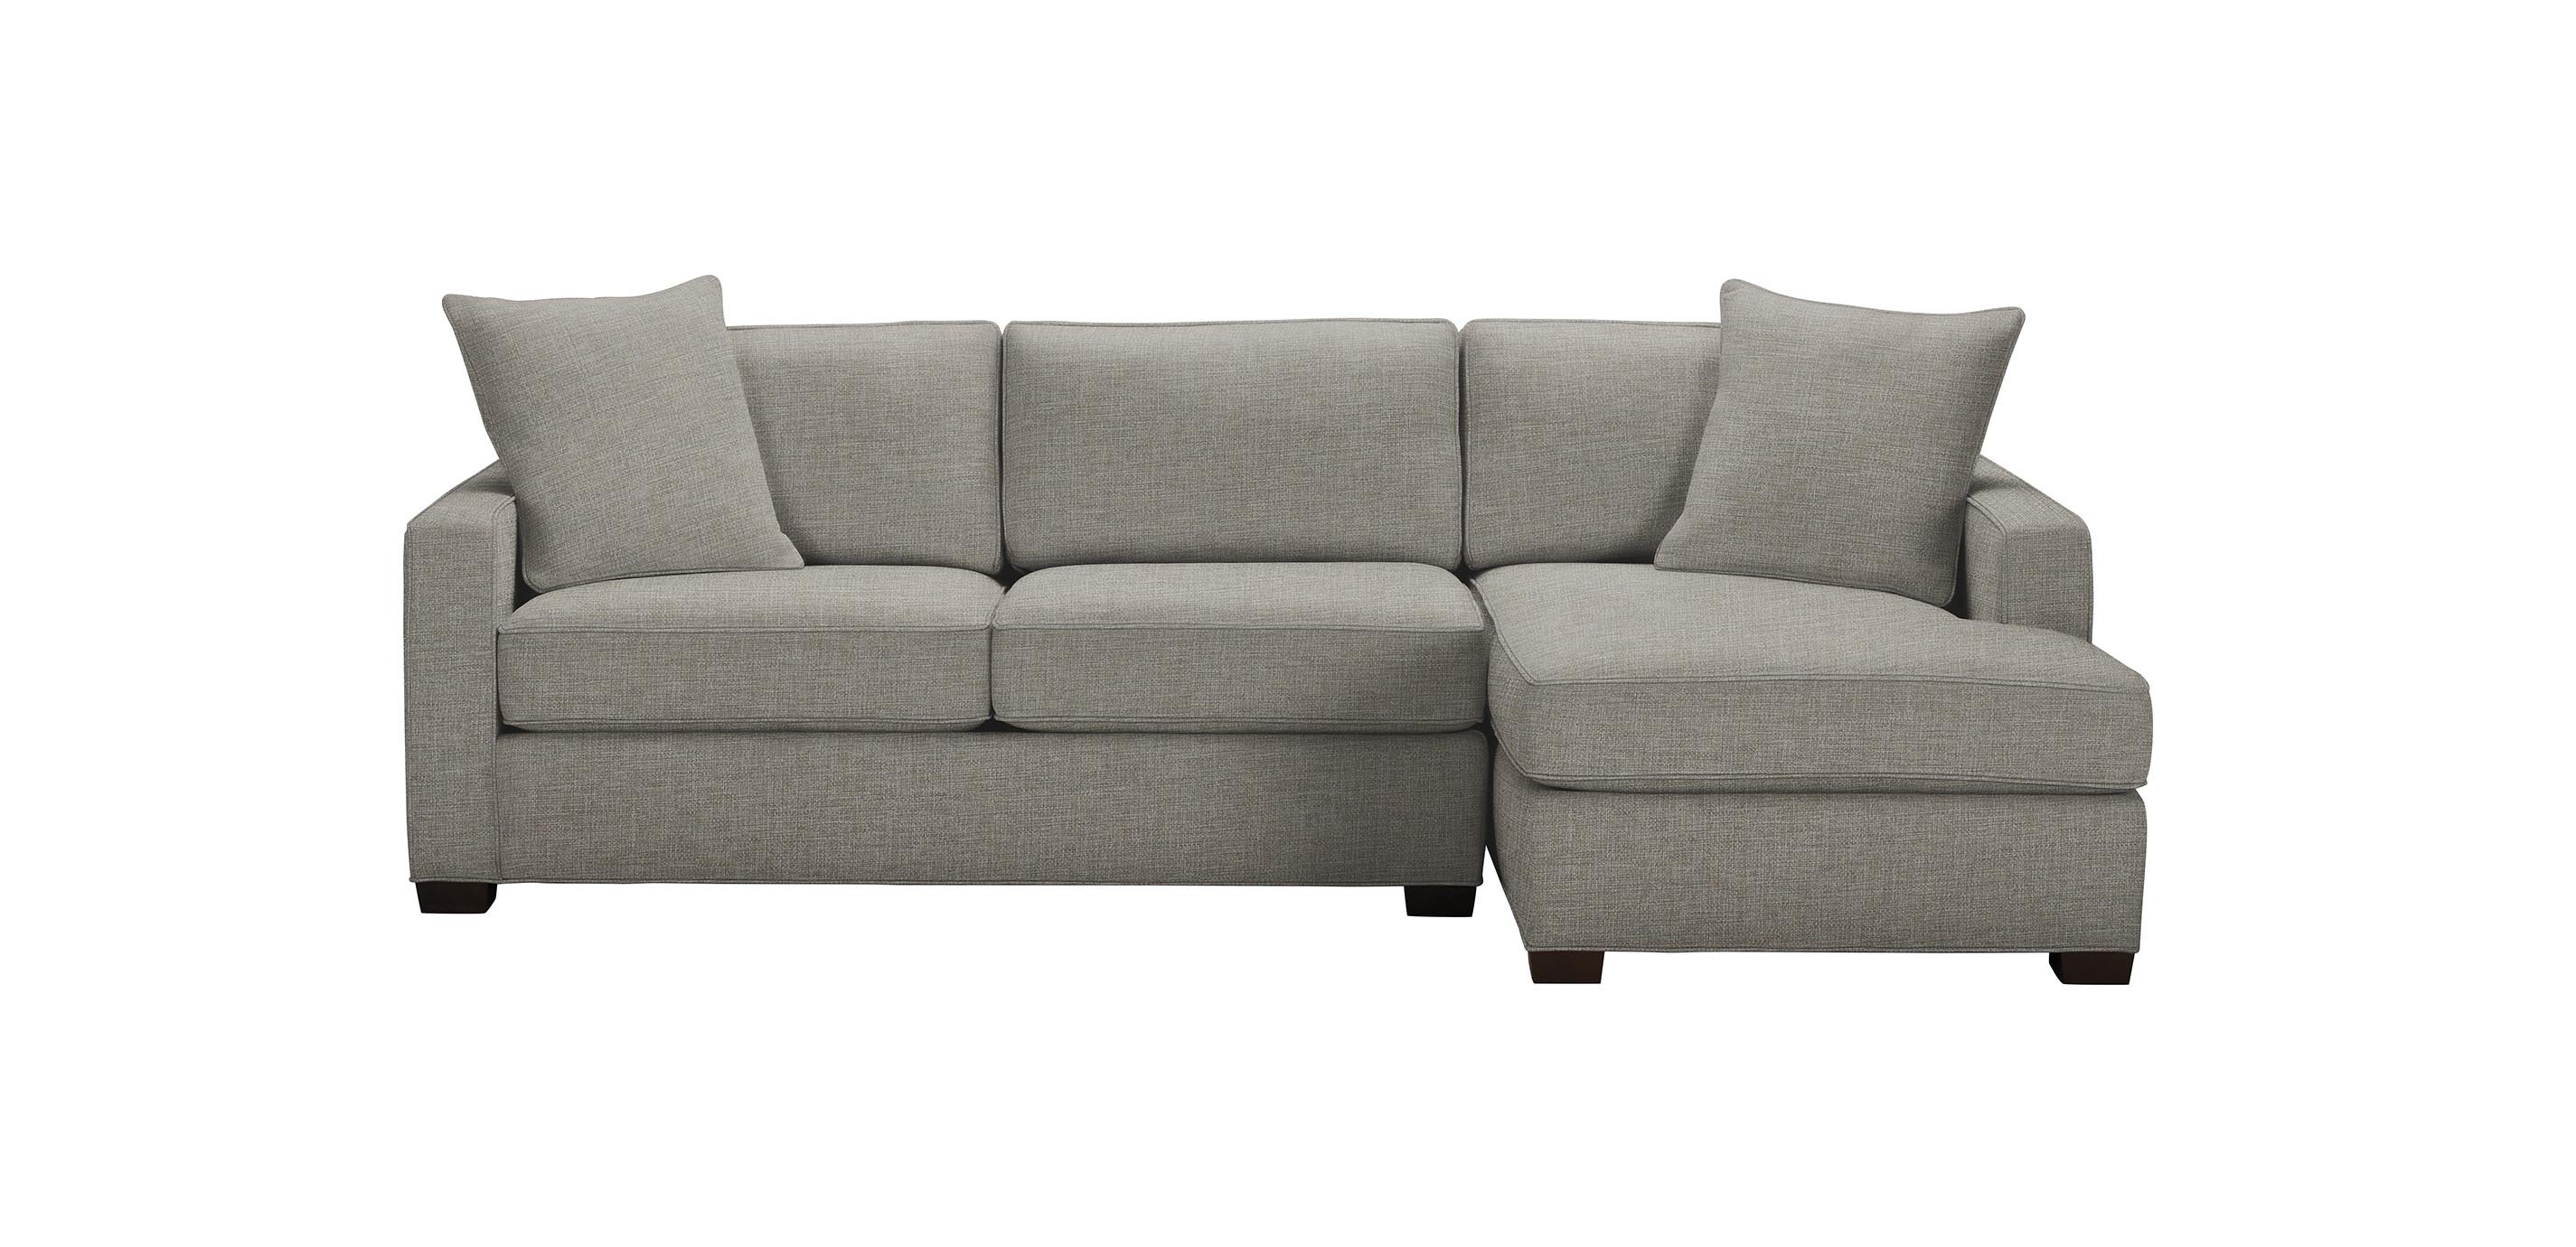 Spencer Track Arm 2 Piece Sectional